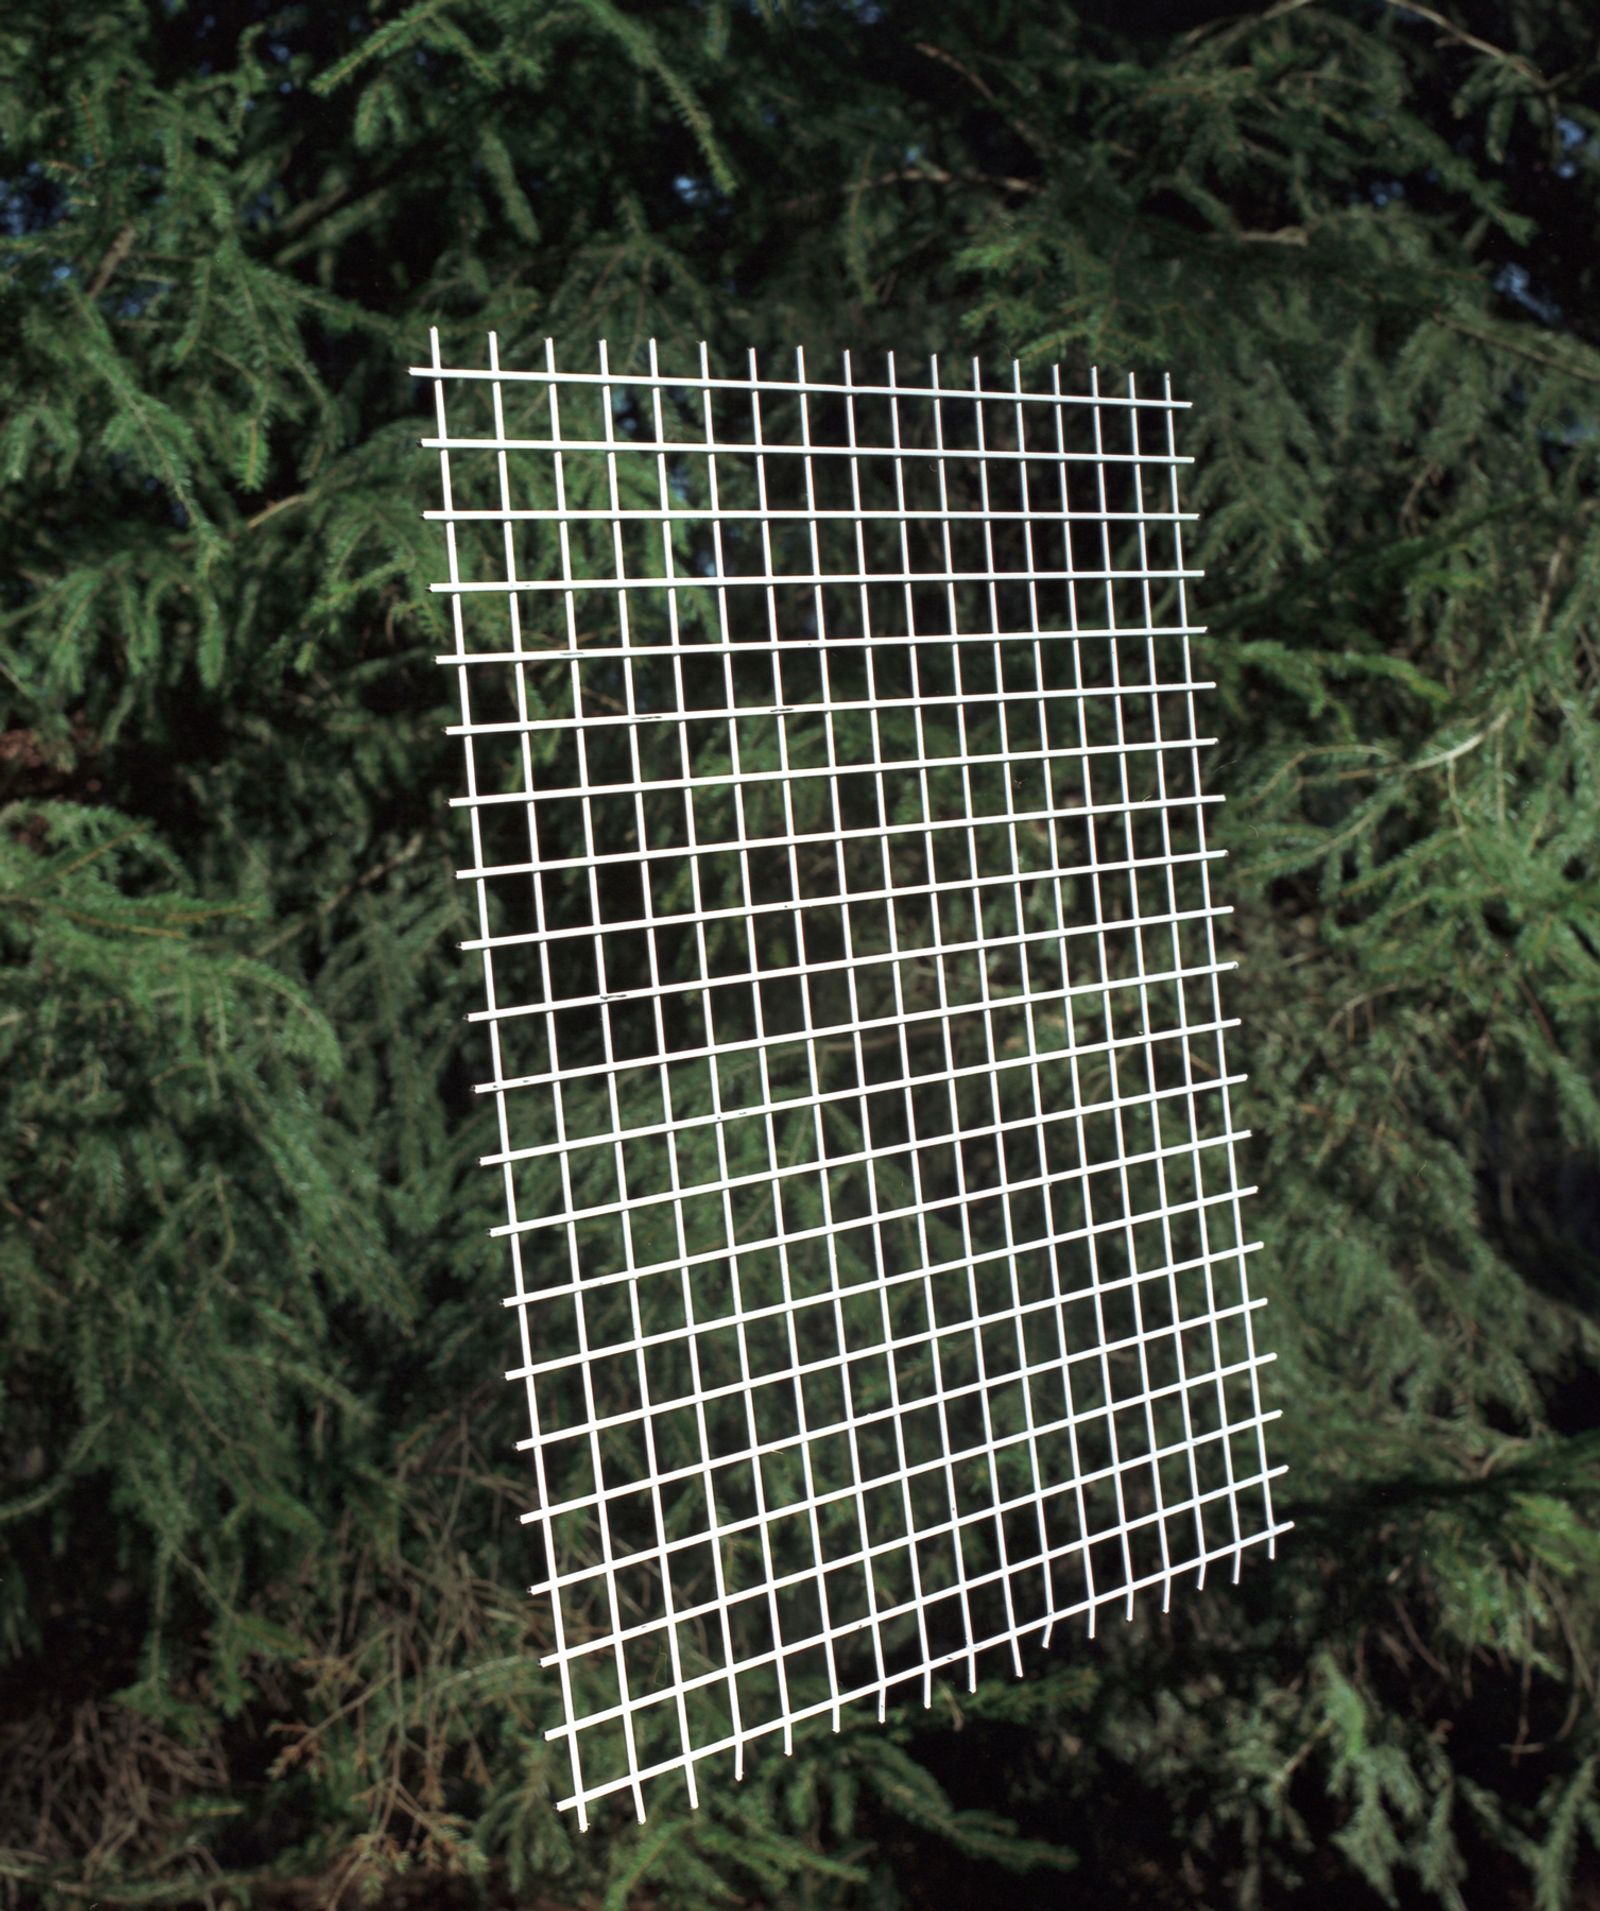 © Sheung Yiu - A metal grid photographed in front of a shrub